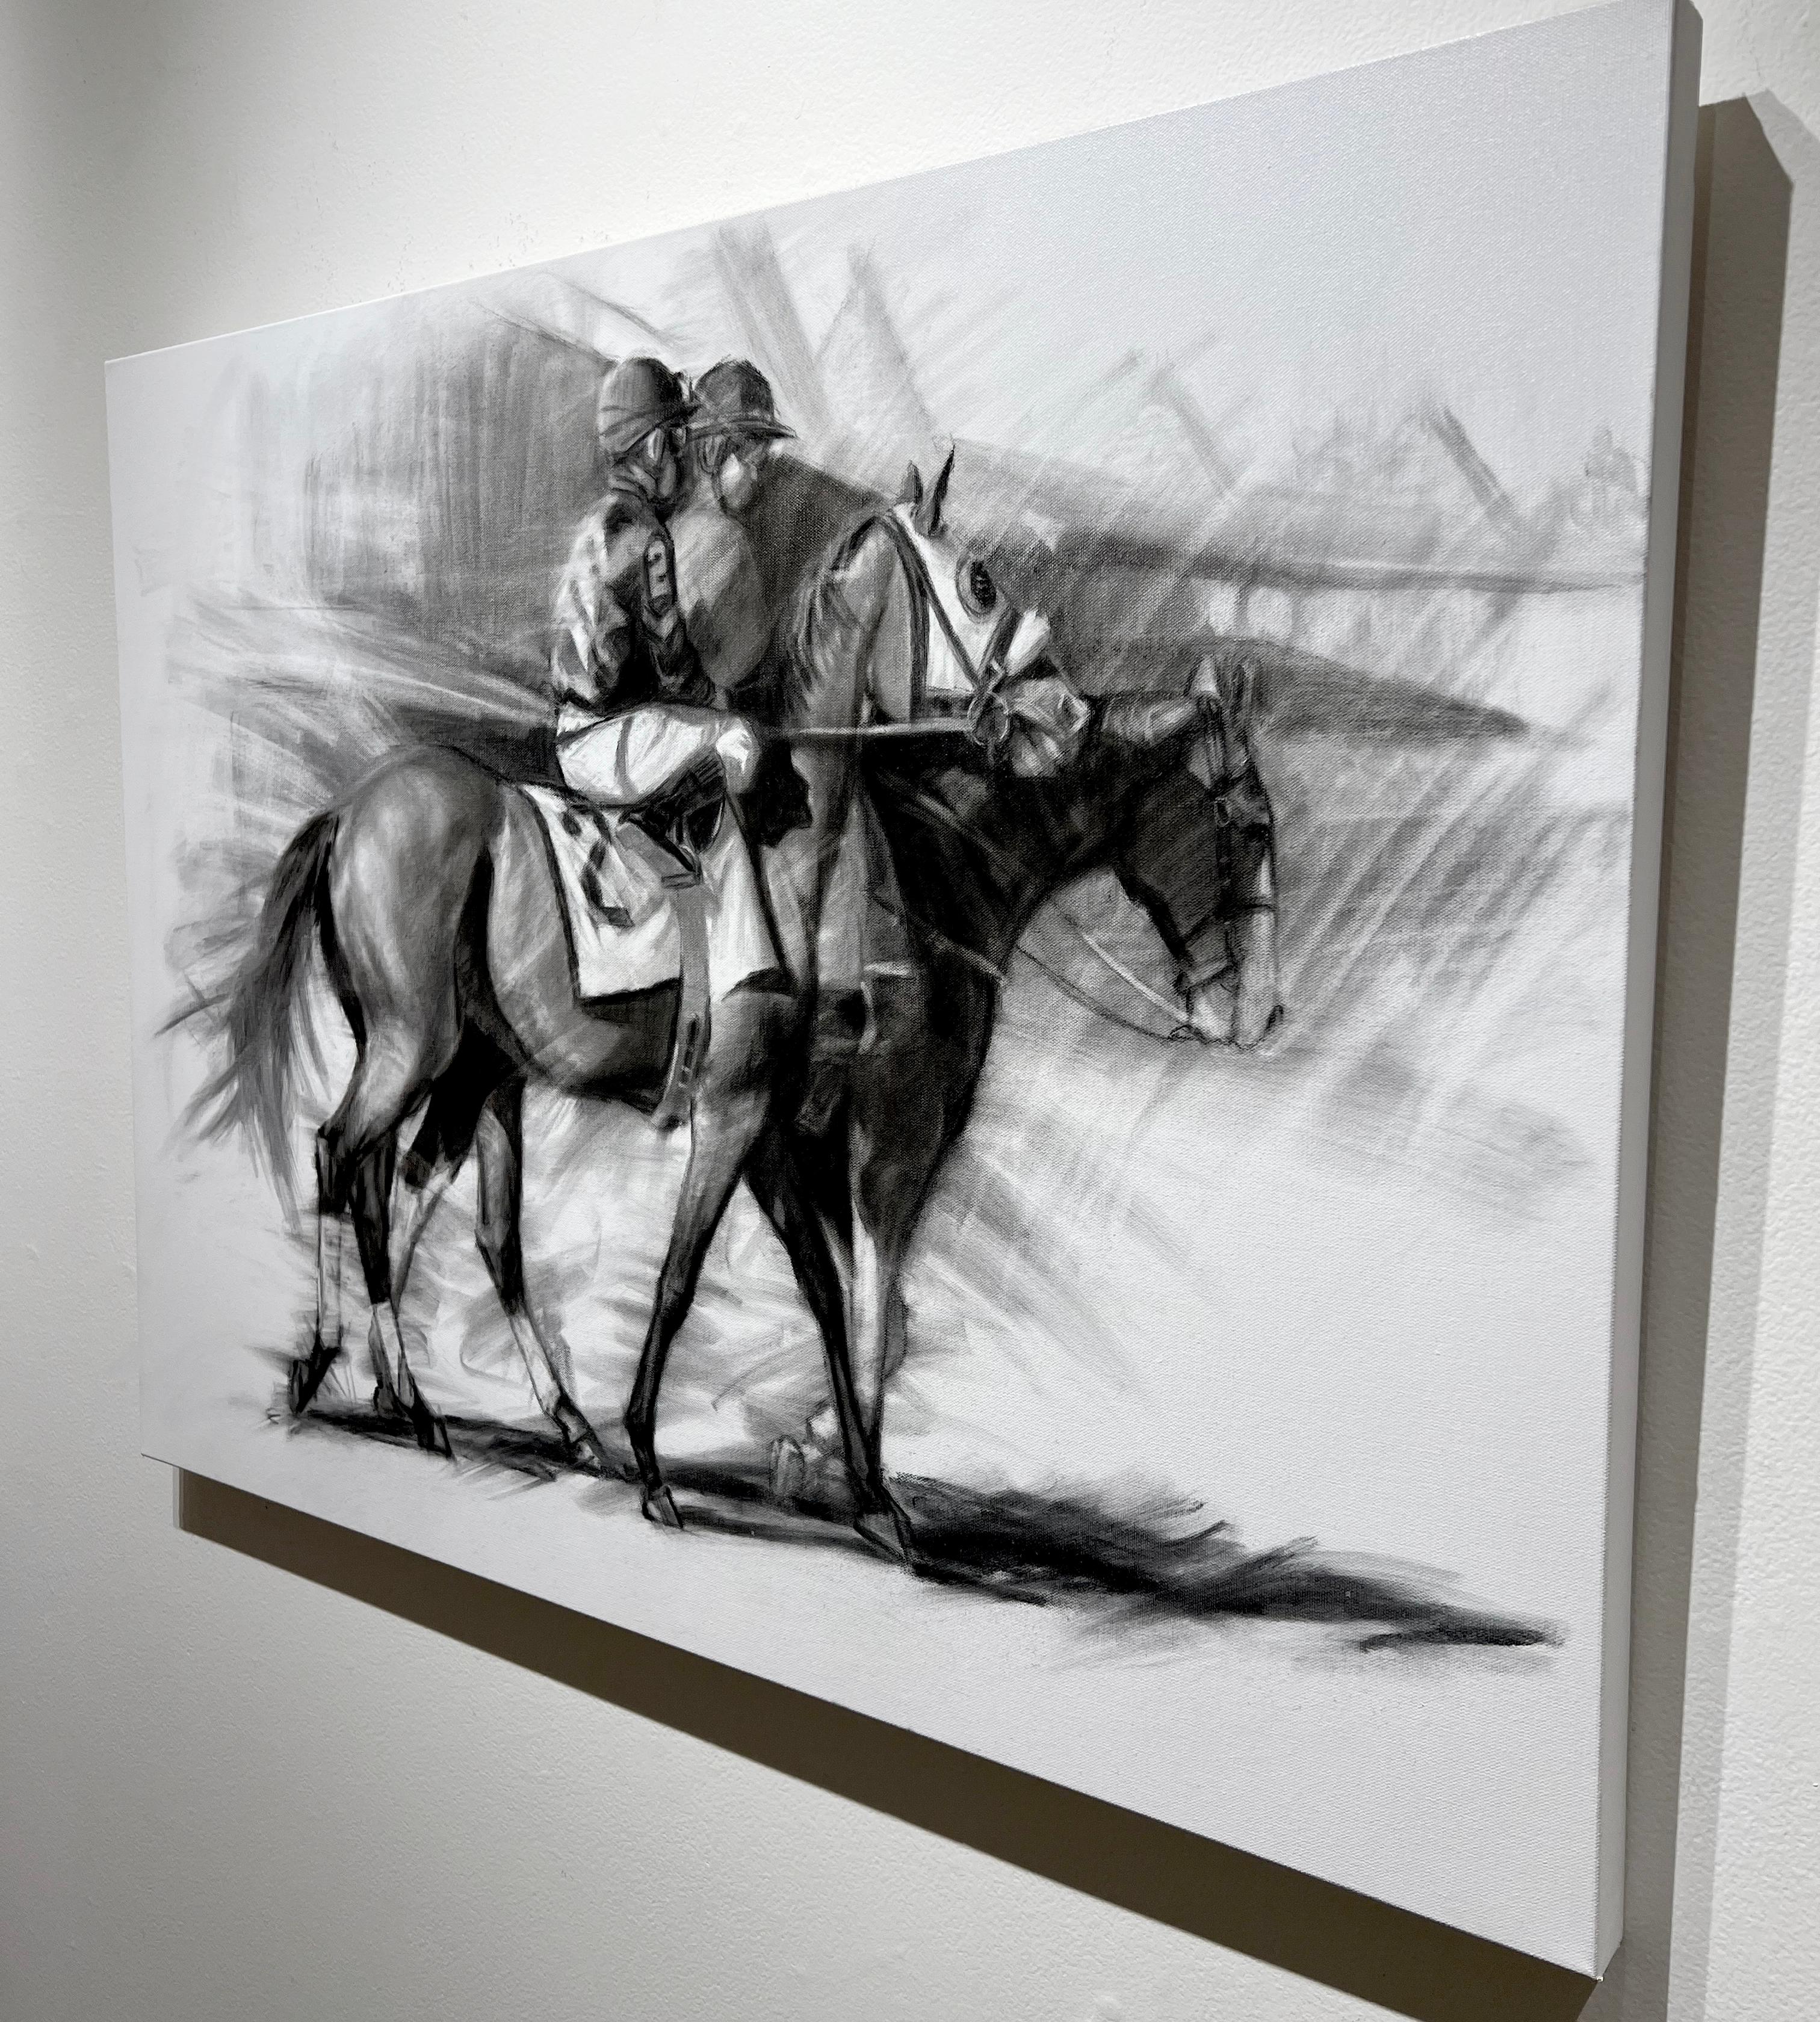 This equine drawing, 